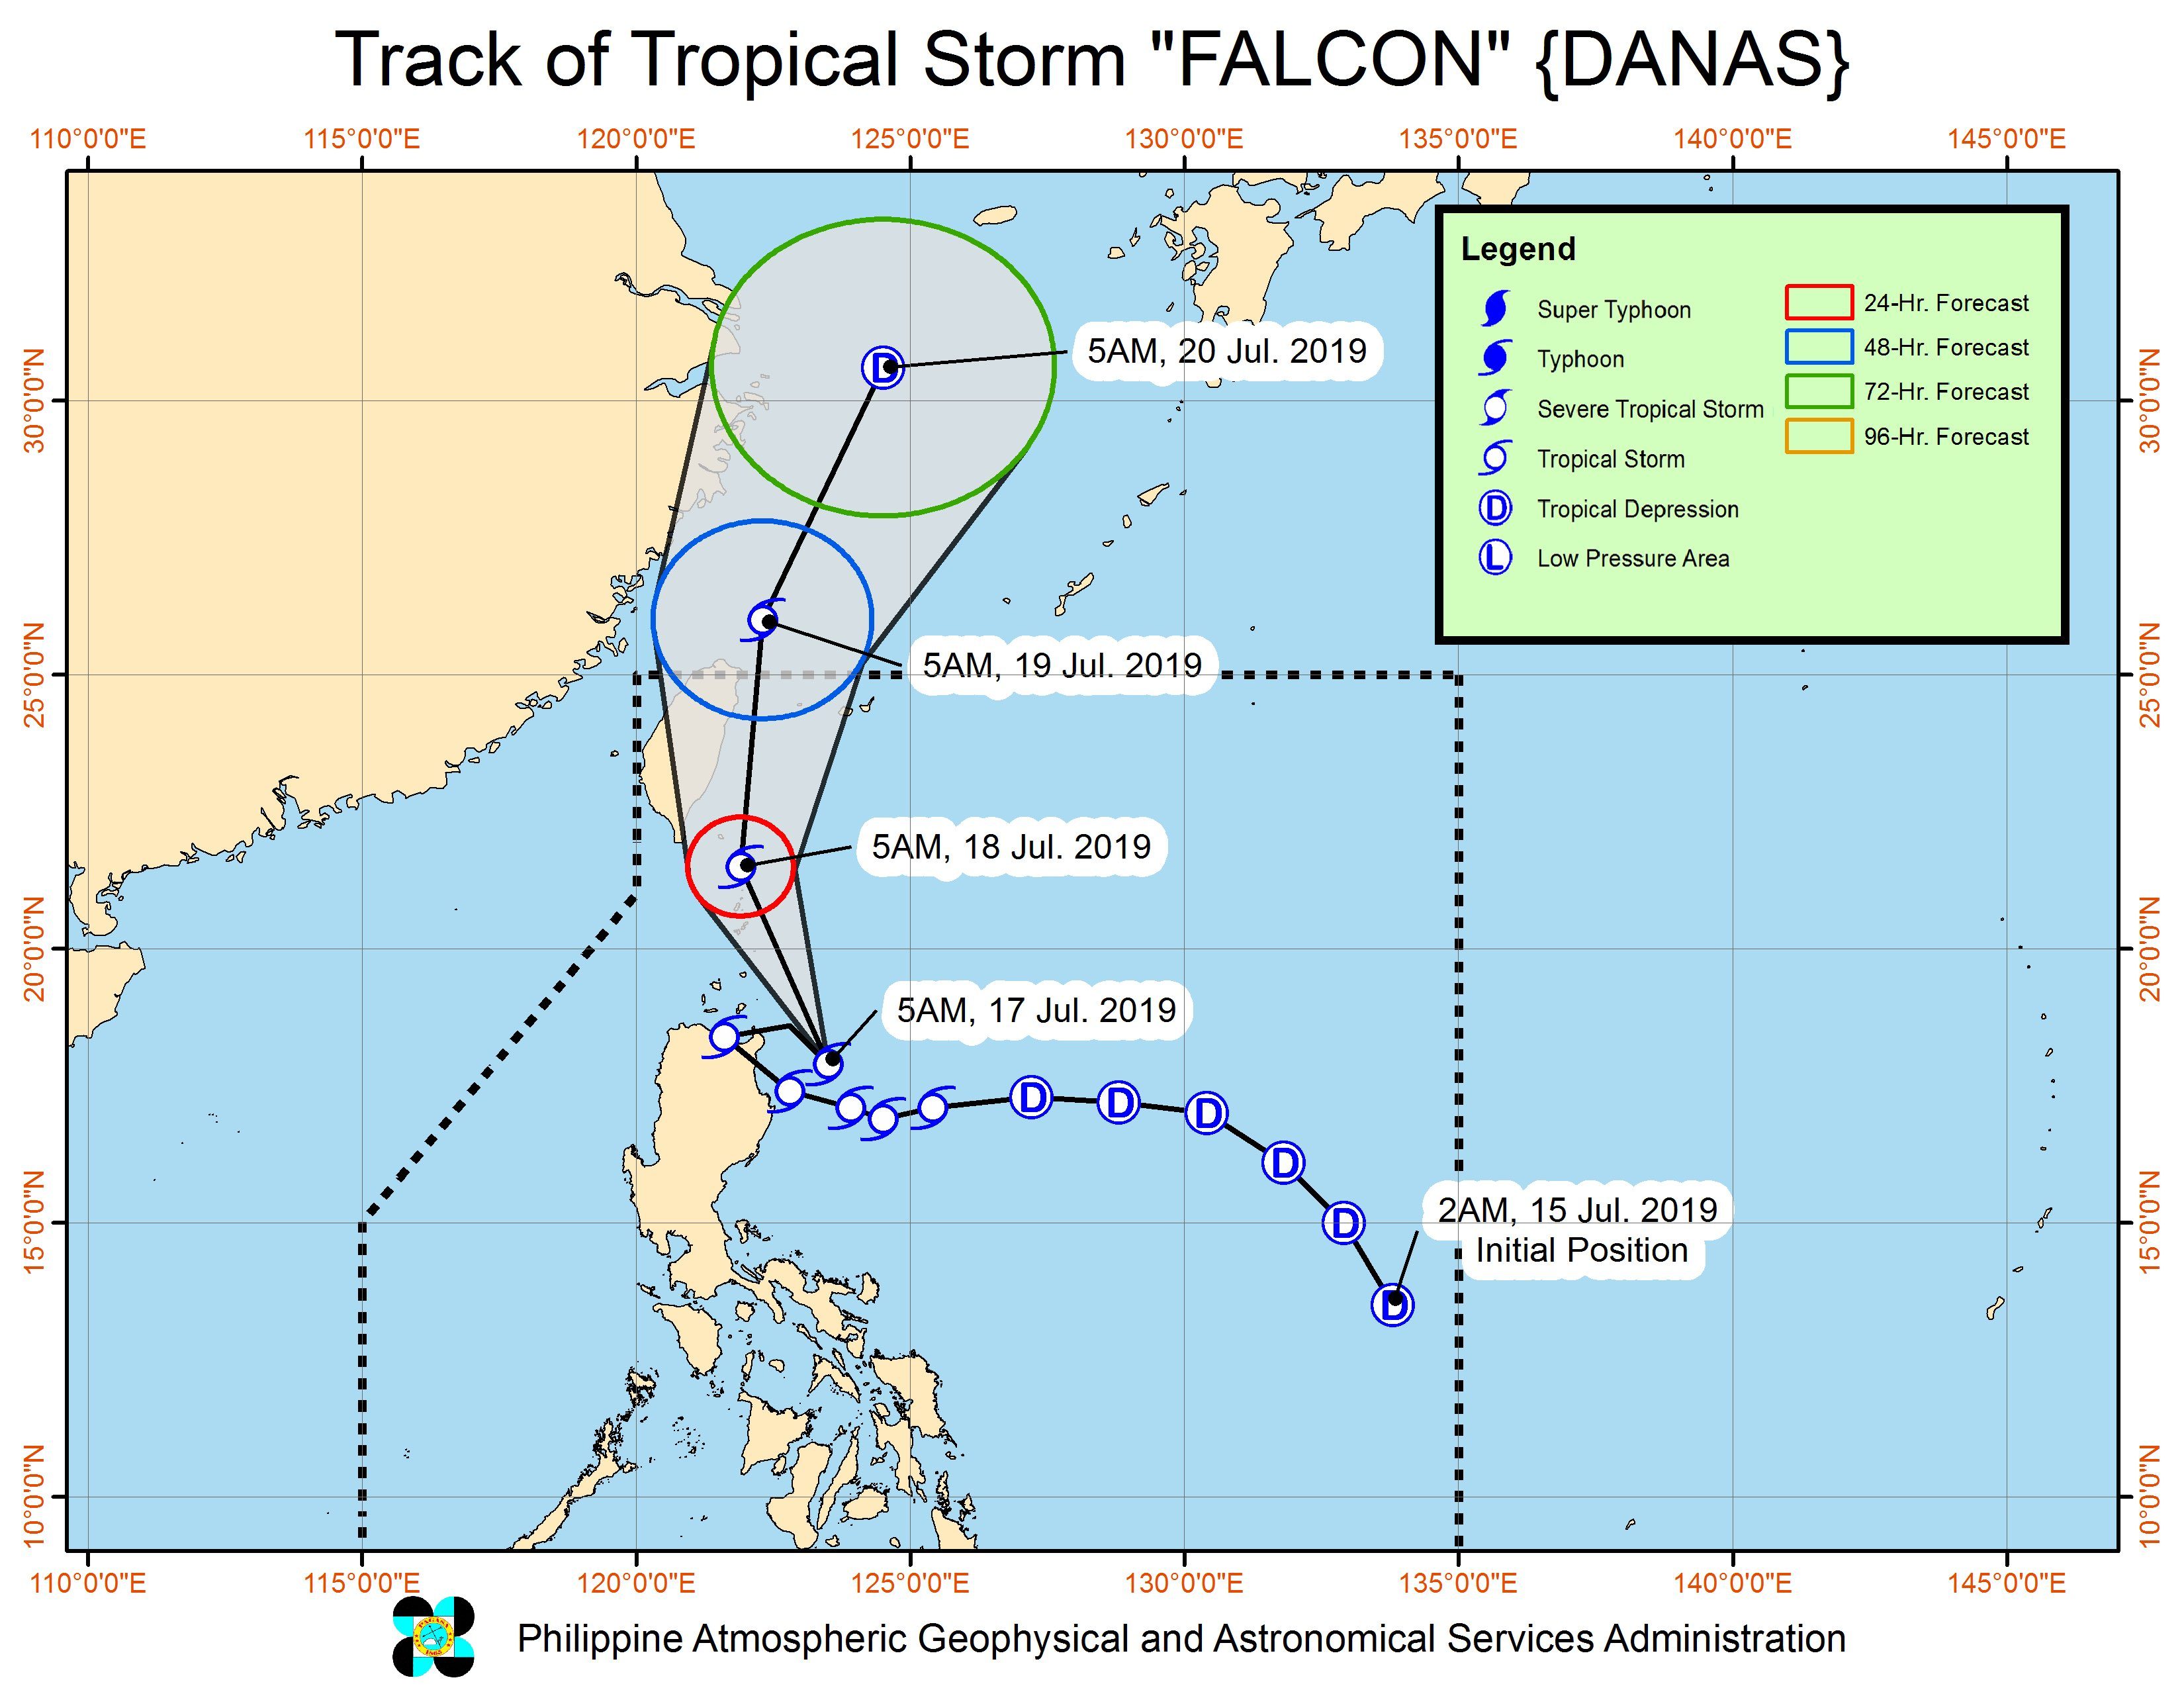 Forecast track of Tropical Storm Falcon (Danas) as of July 17, 2019, 8 am. Image from PAGASA 